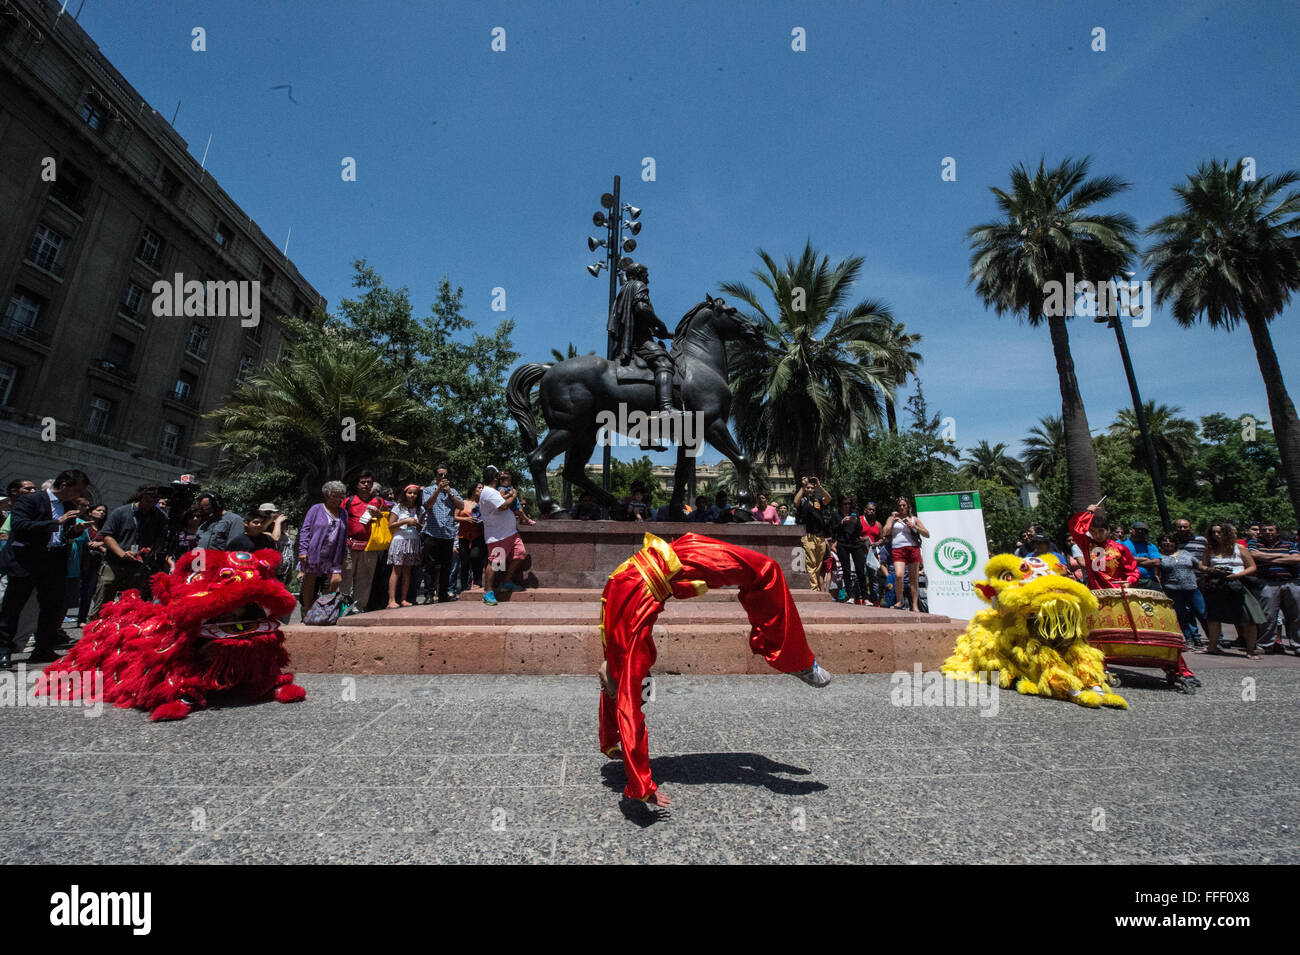 (160212) -- SANTIAGO, Feb. 12, 2016 (Xinhua) -- Dancers perform Lion Dance during the Chinese Lunar New Year and 'Feast of Santiago' celebrations, at the Plaza de Armas in Santiago, capital of Chile, on Feb. 12, 2016. 'Feast of Santiago' celebrates the 475th anniversary of the founding of the Chilean capital of Santiago by Pedro de Valdivia. (Xinhua/Jorge Villegas) (jg) (fnc) Stock Photo